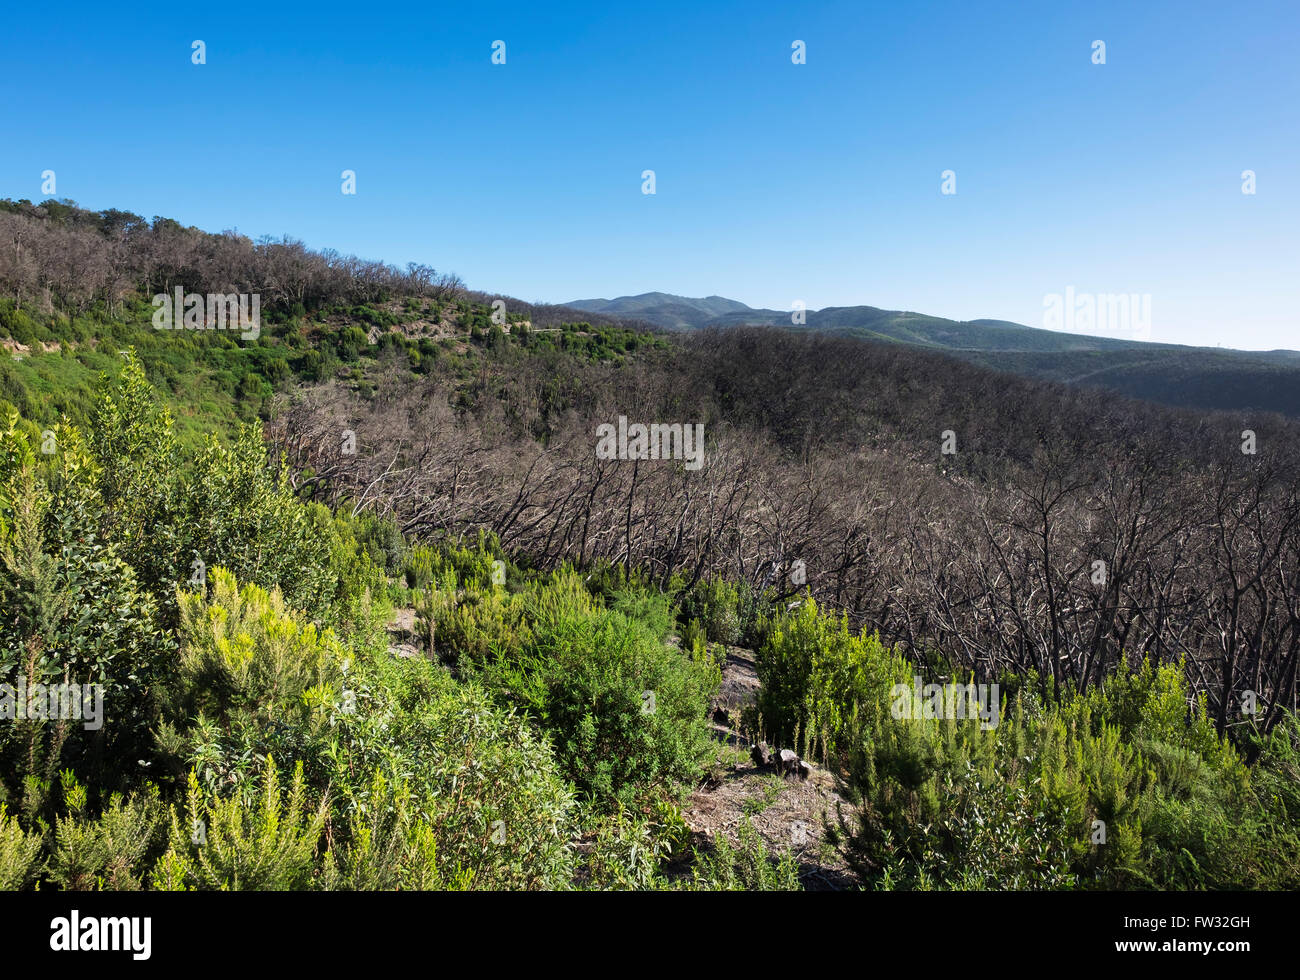 Burnt laurel forest, three years after a forest fire, Garajonay National Park, La Gomera, Canary Islands, Spain Stock Photo